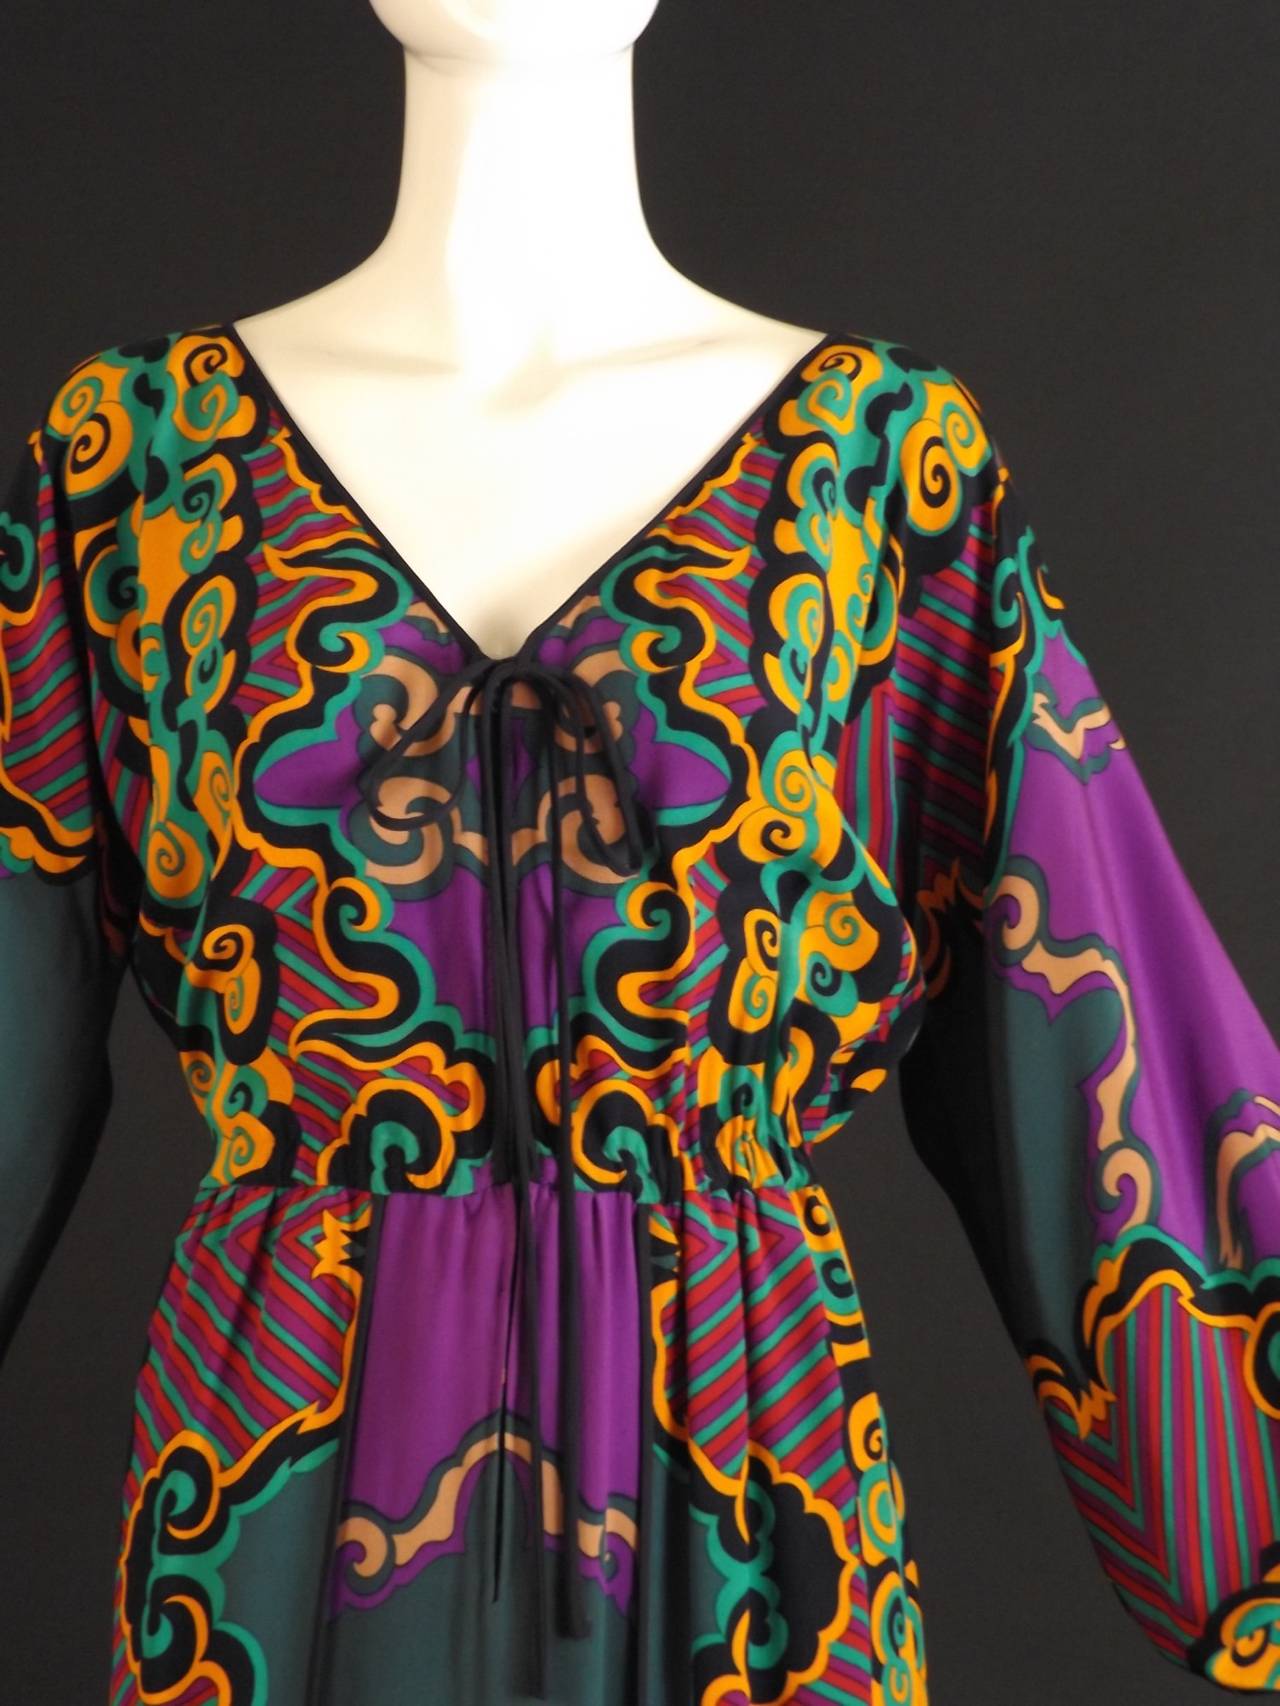 Gorgeous 1970s maxi dress in a fine printed silk in green, purple, yellow and black.   Zipper closure down the front with string ties at the base of the neckline. Elastic gathered at the waistline. Two panel skirt. The front wraps around to either